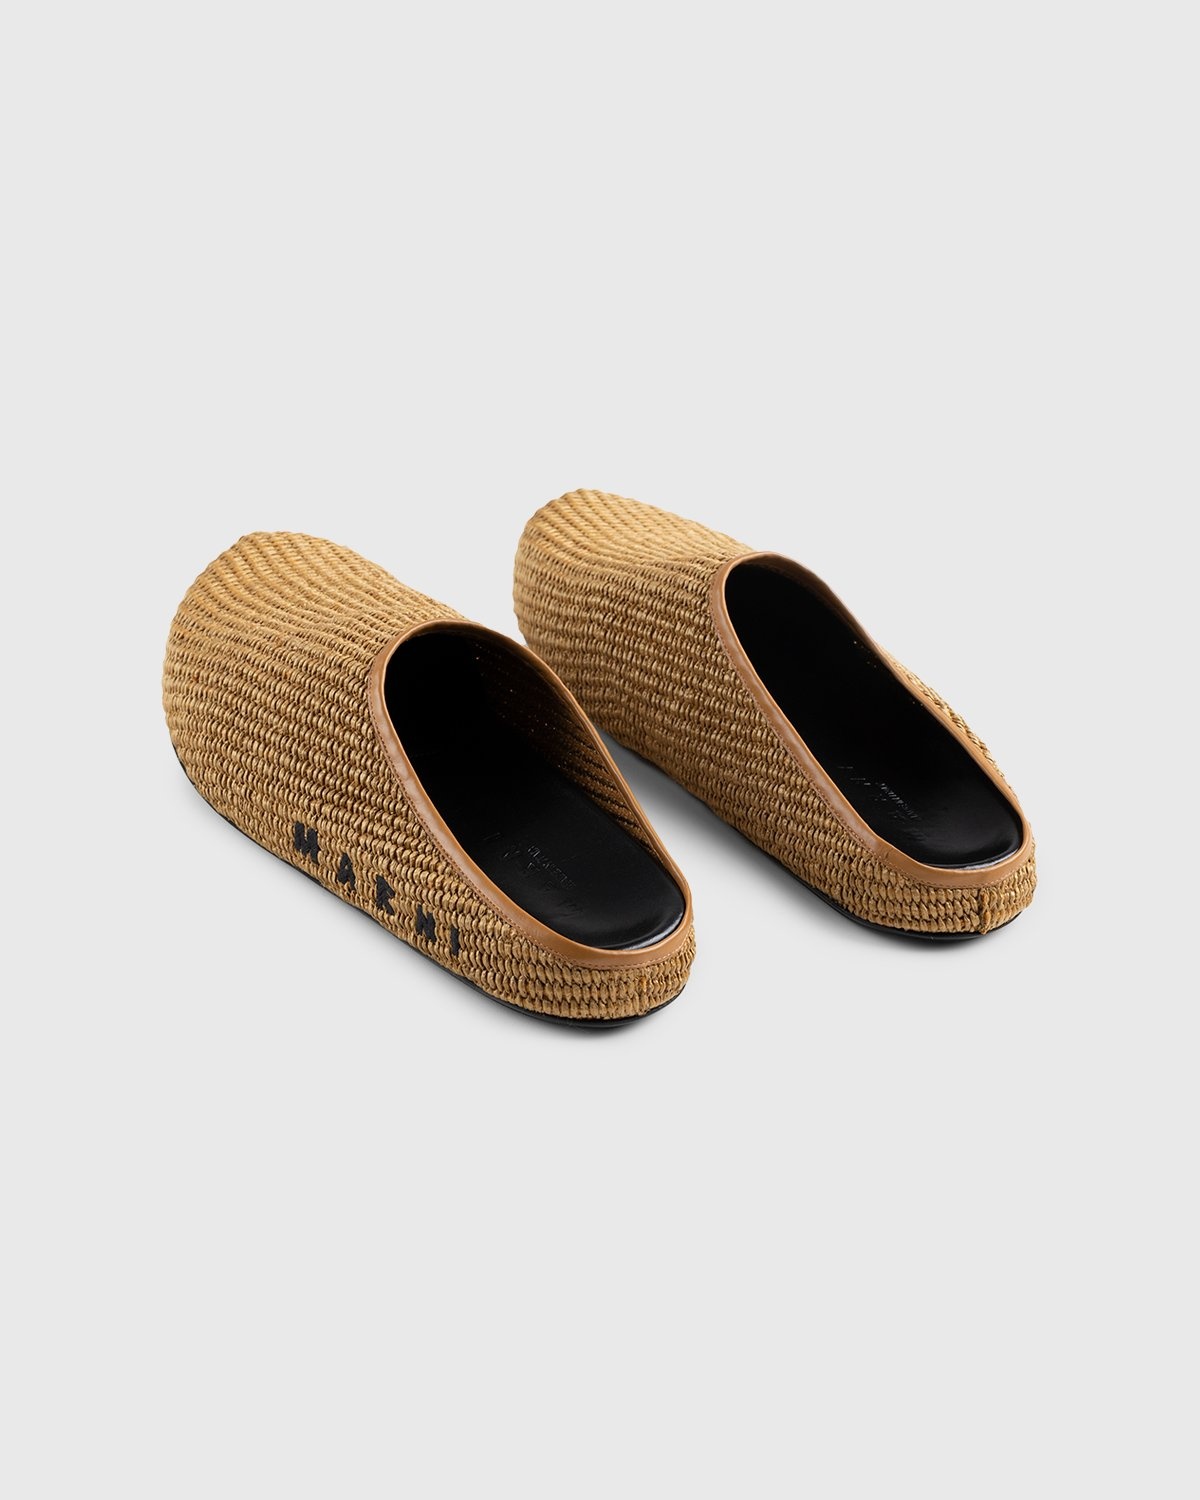 Marni – Woven Raffia and Leather Mules Brown/Black - Shoes - Brown - Image 4